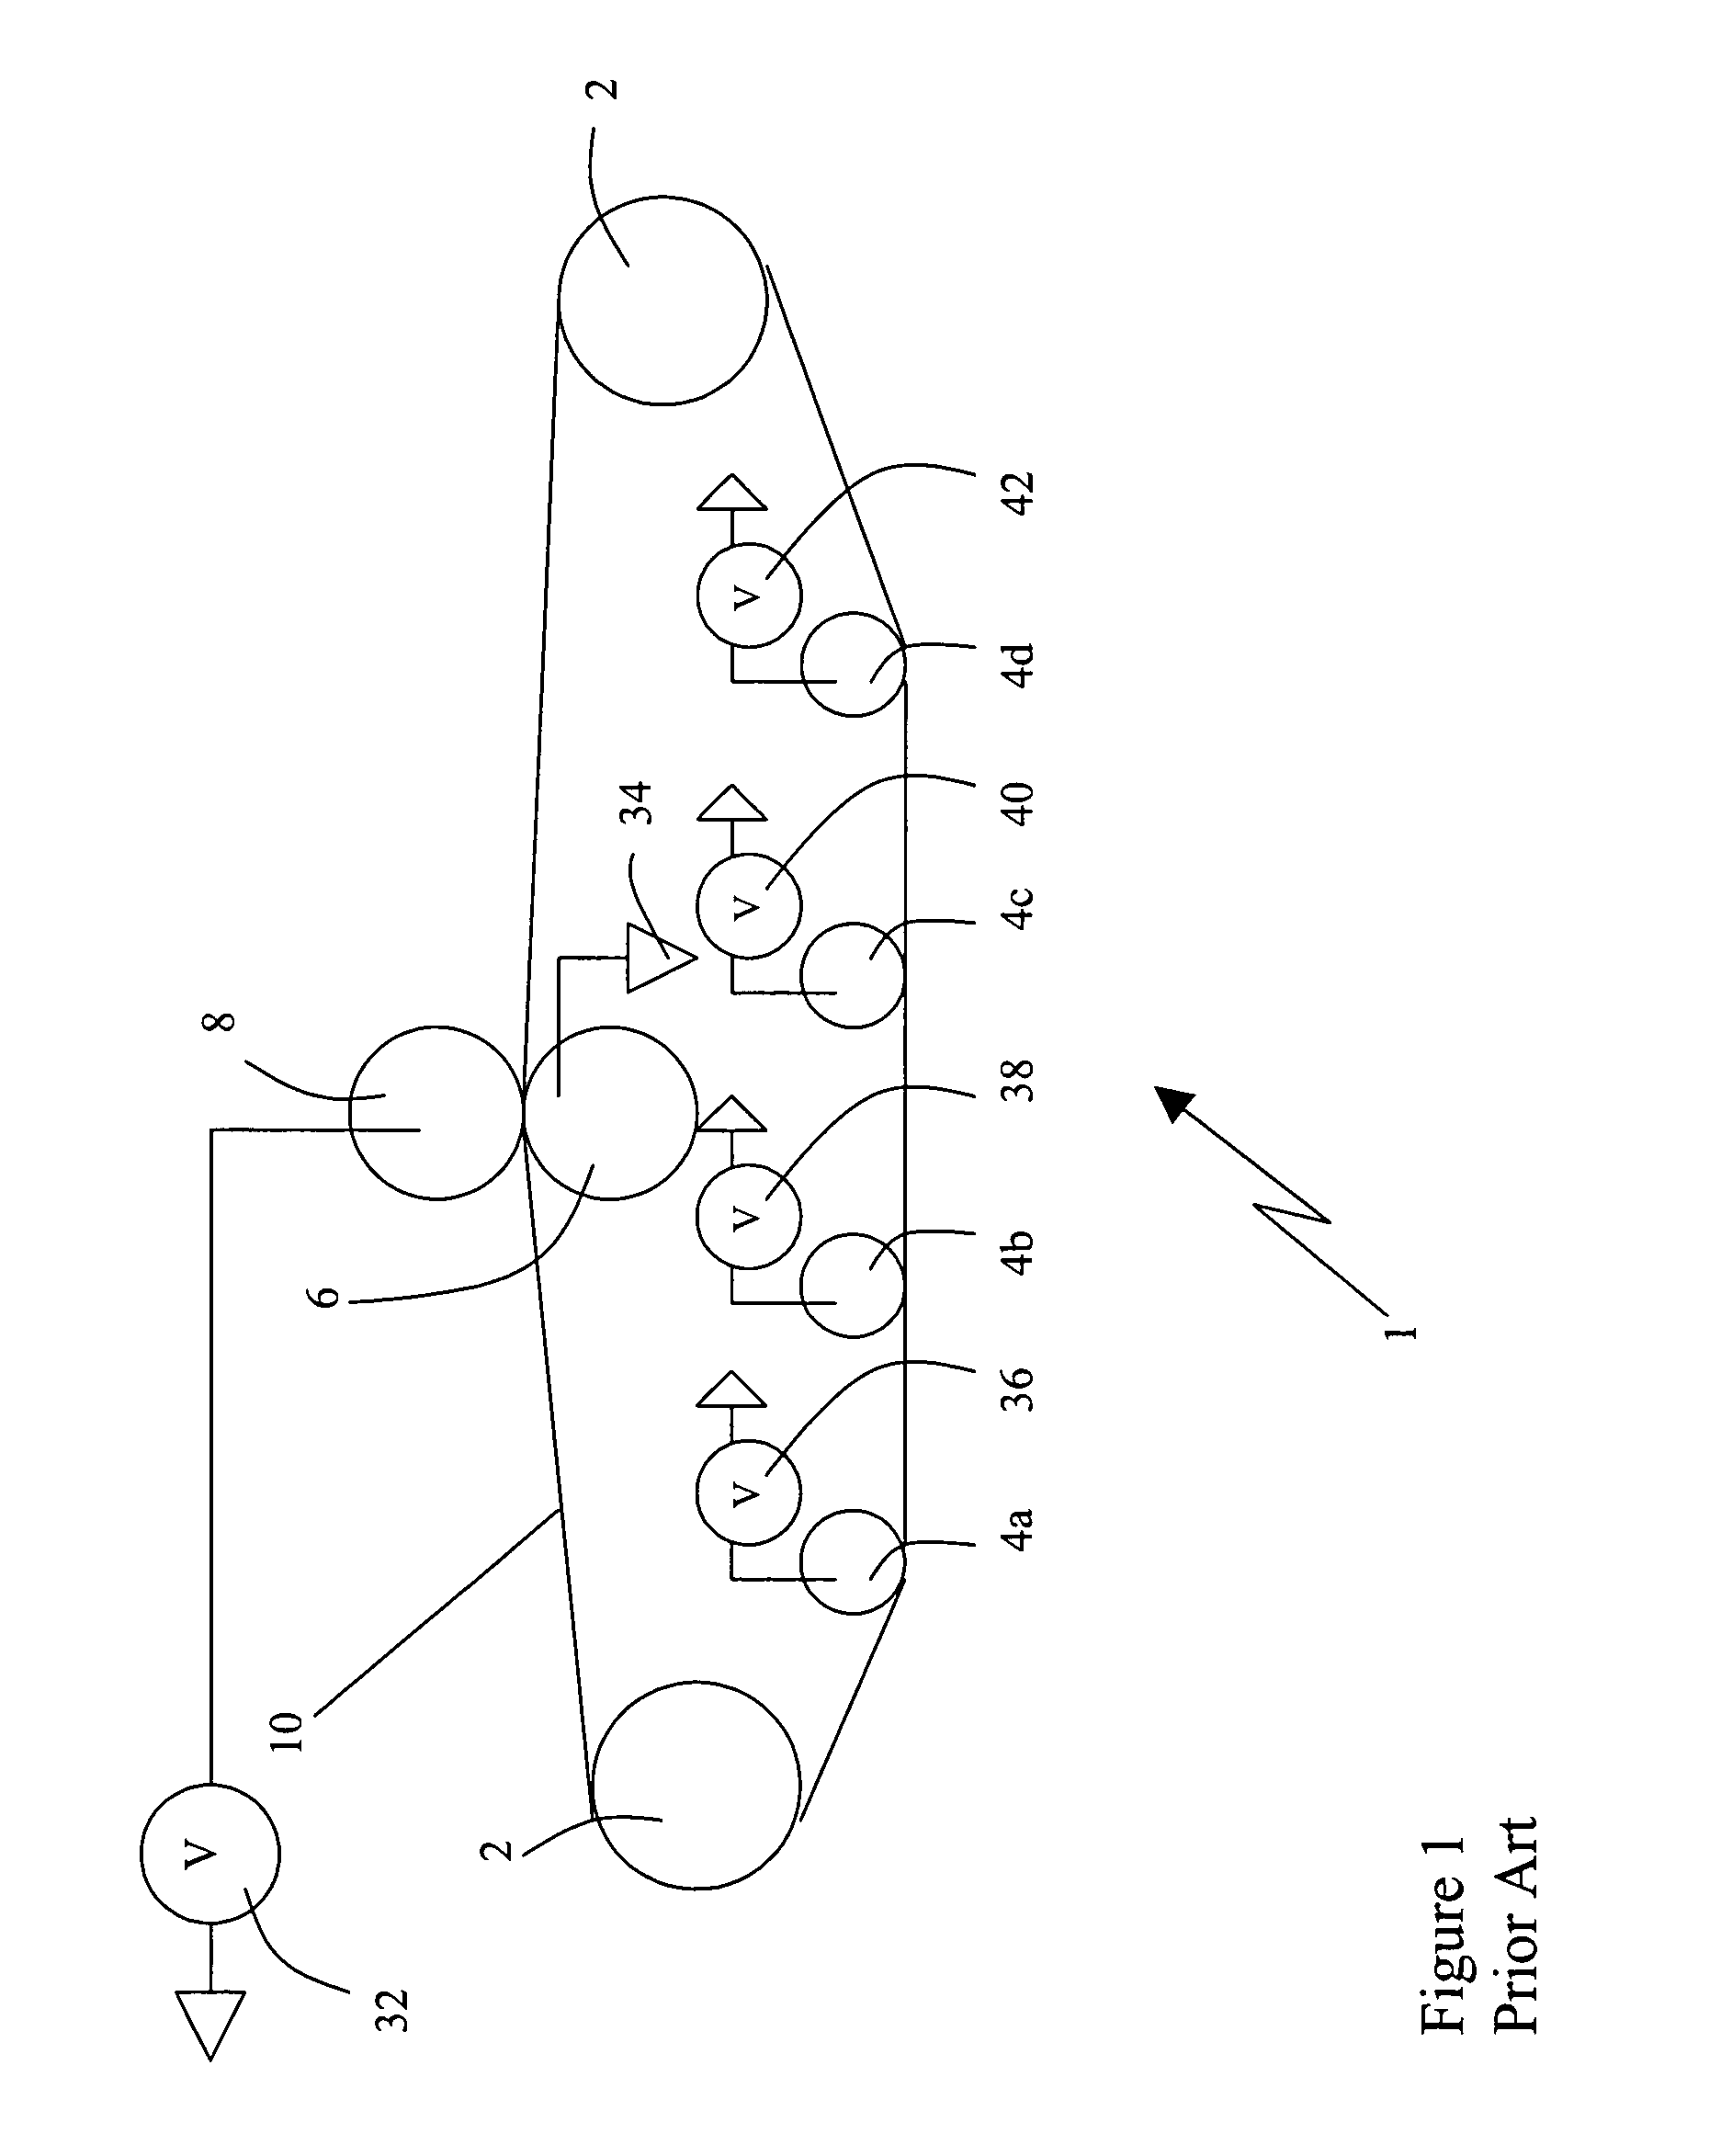 Intermediate transfer member for carrying intermediate electrophotographic image